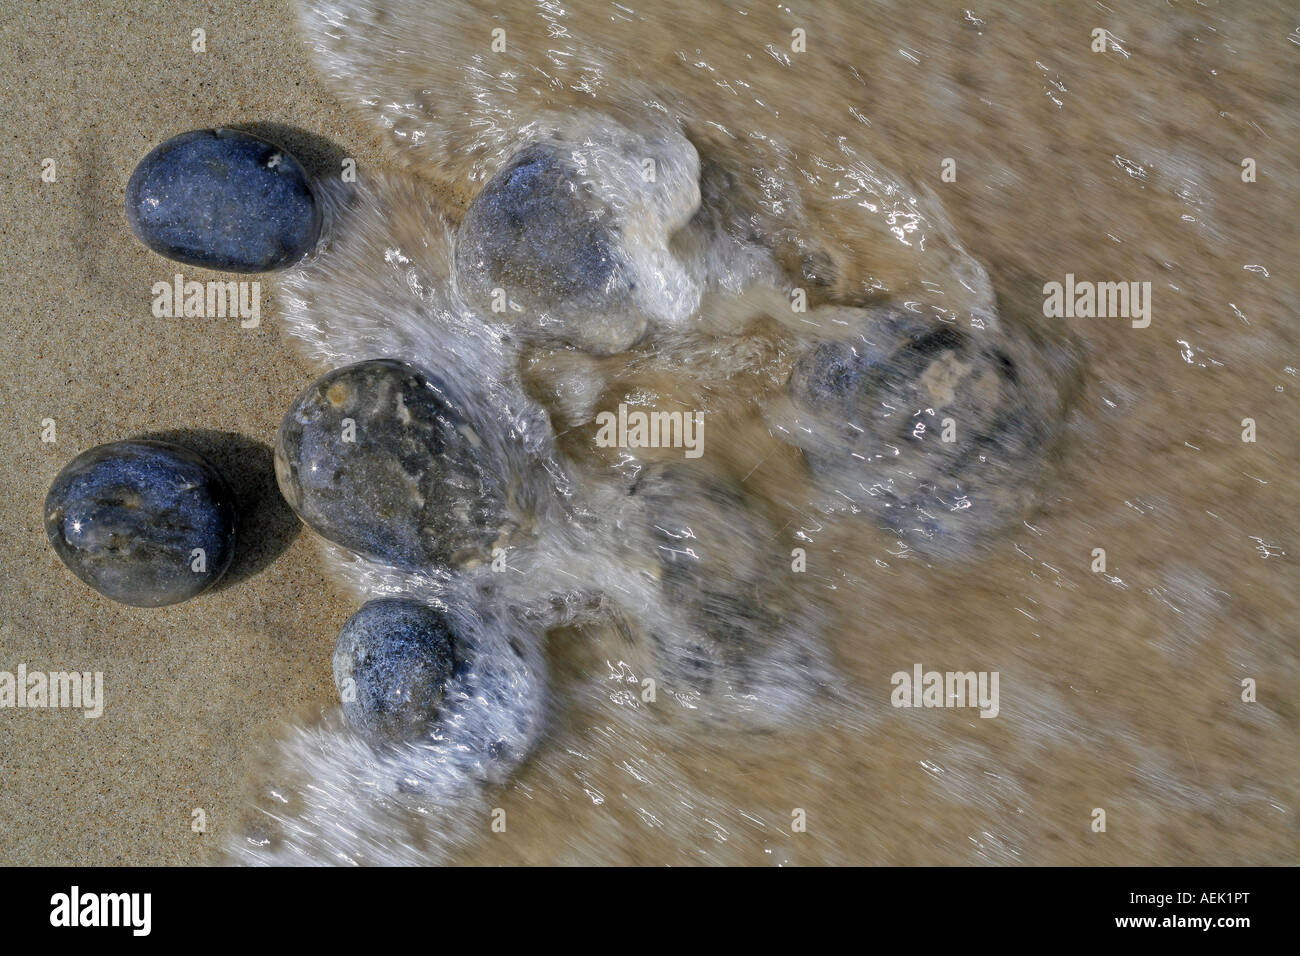 Stones washed by the tide Stock Photo